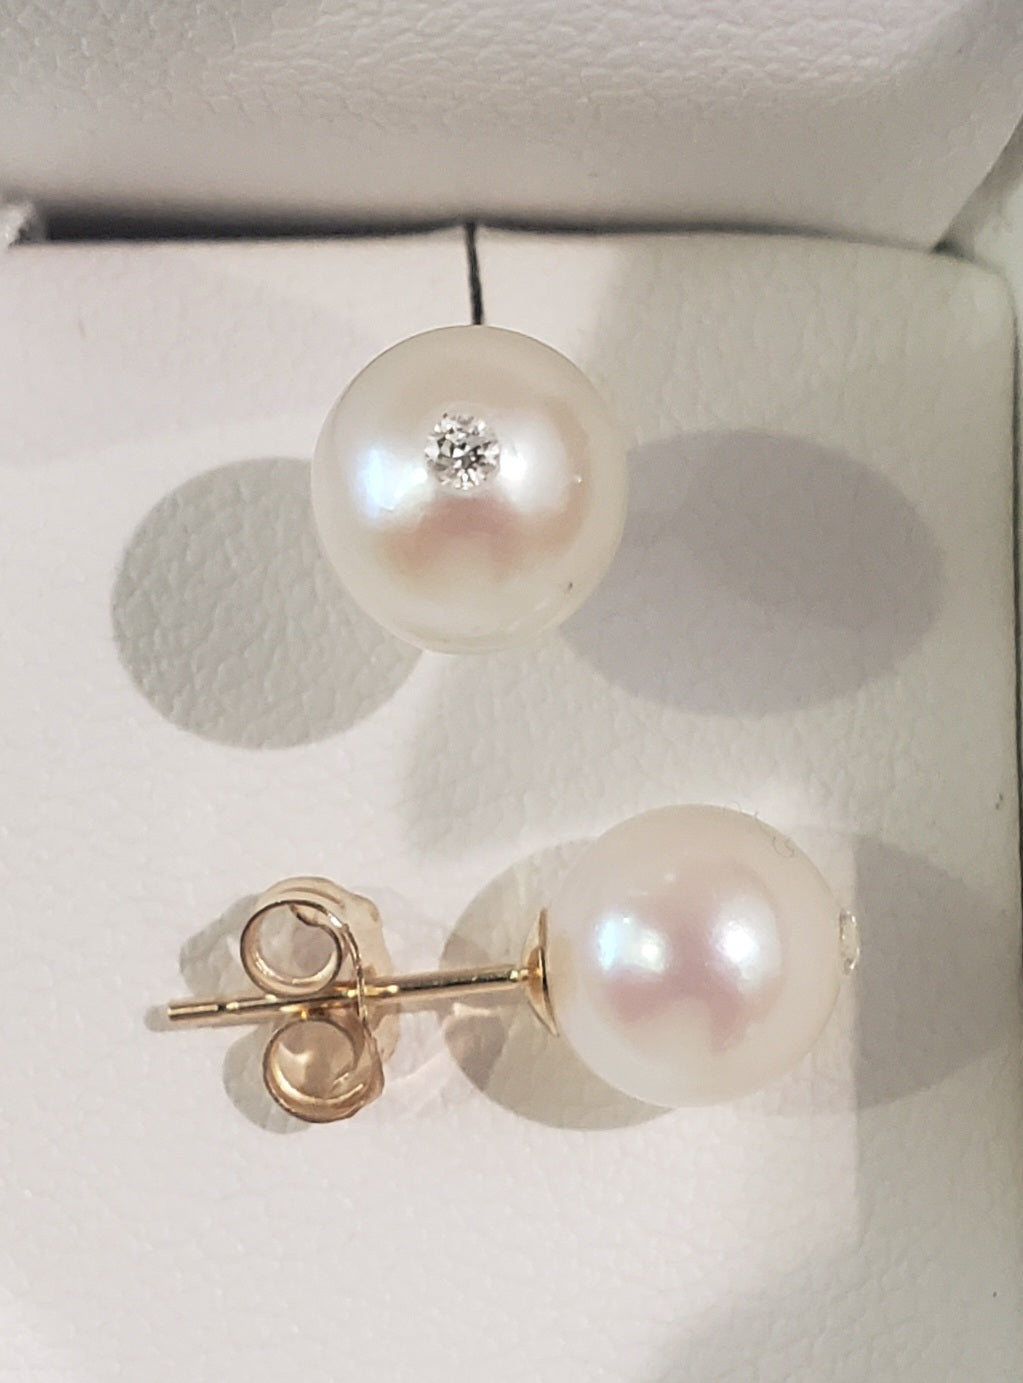 14K Yellow Gold 6.5-7.0mm Cultured Pearl and 0.025cttw Diamond Earrings with Butterfly Backs